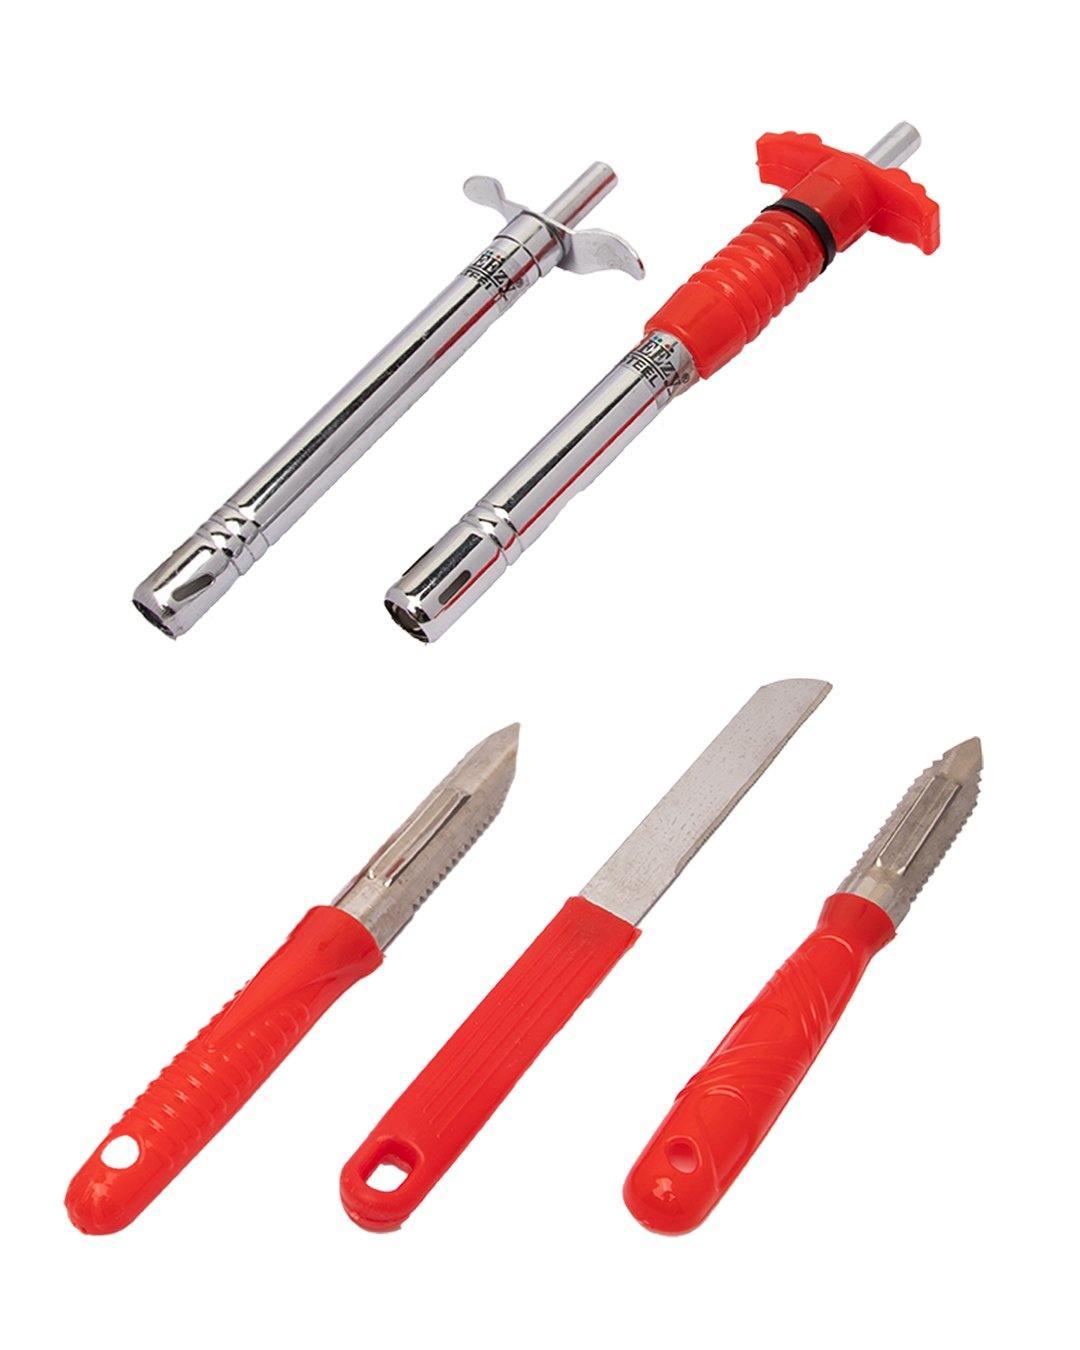 Kitchen Utility Set, Kitchen Tools, Red & Silver, Stainless Steel, Set of 5 - MARKET 99